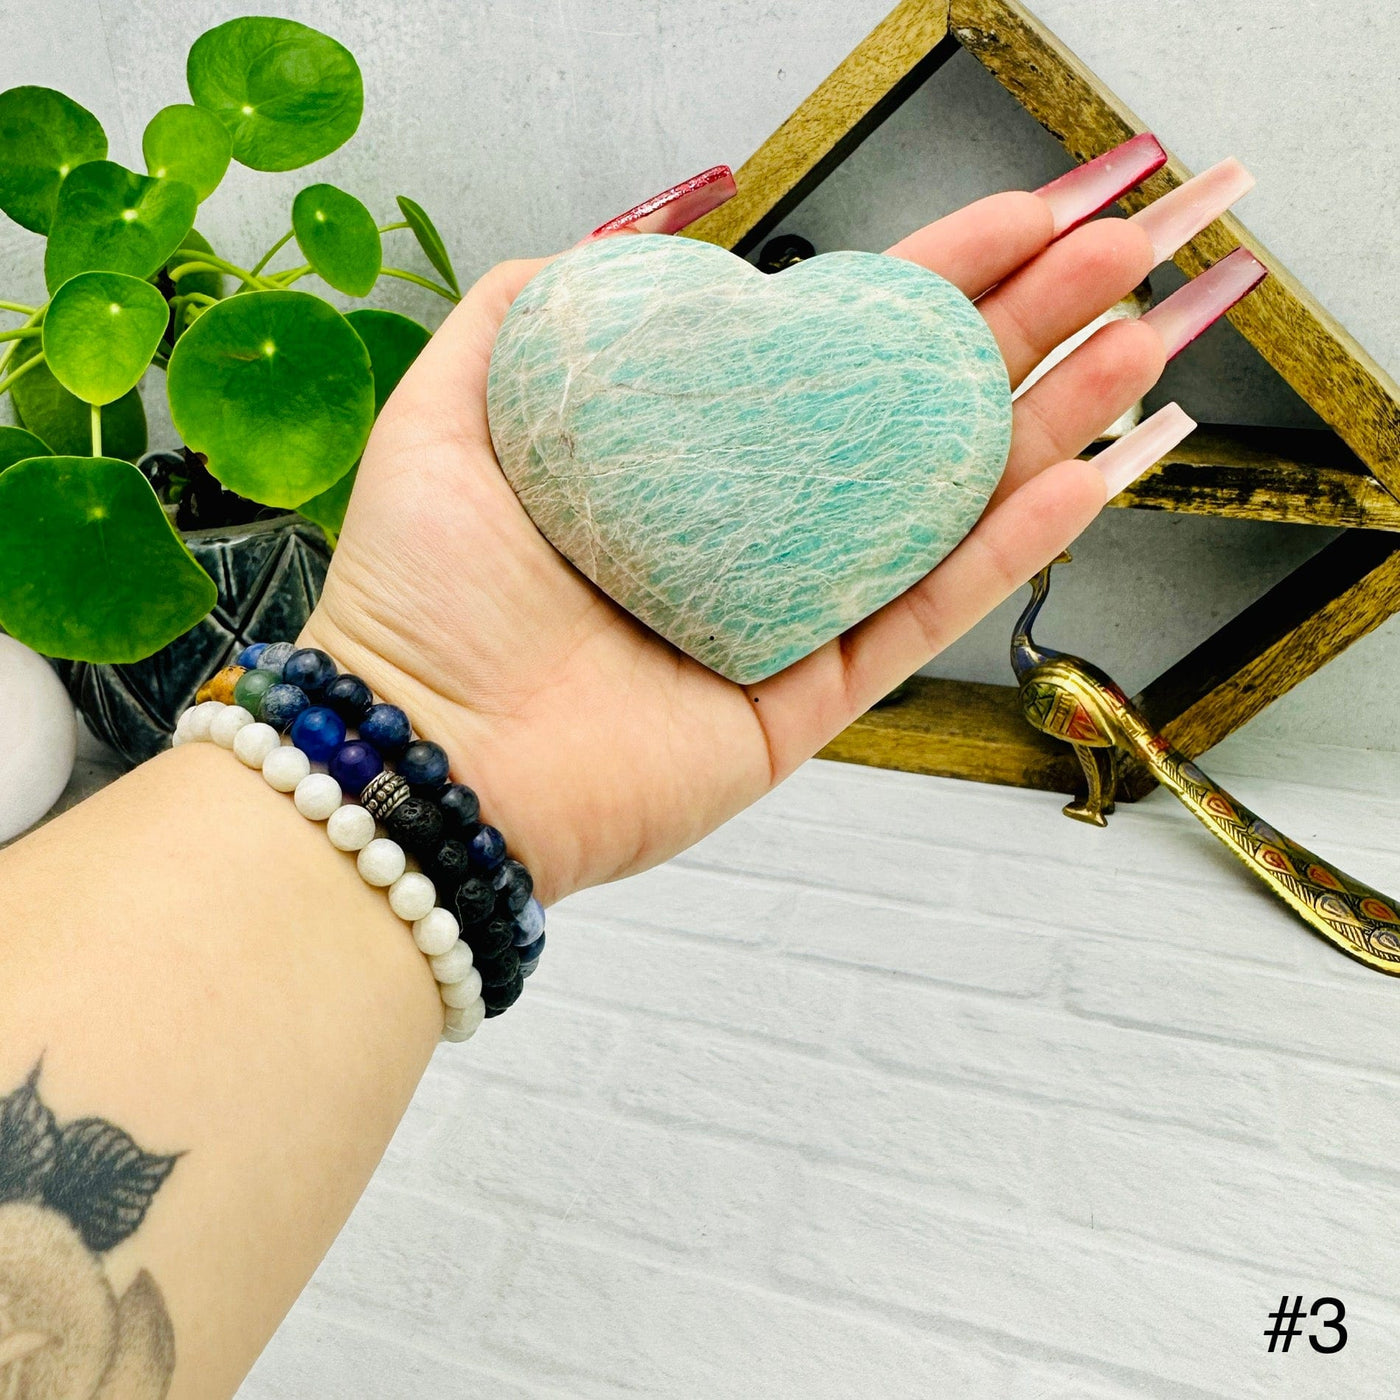 Polished Amazonite Heart - YOU CHOOSE - choice number three close up view with hand for size refence